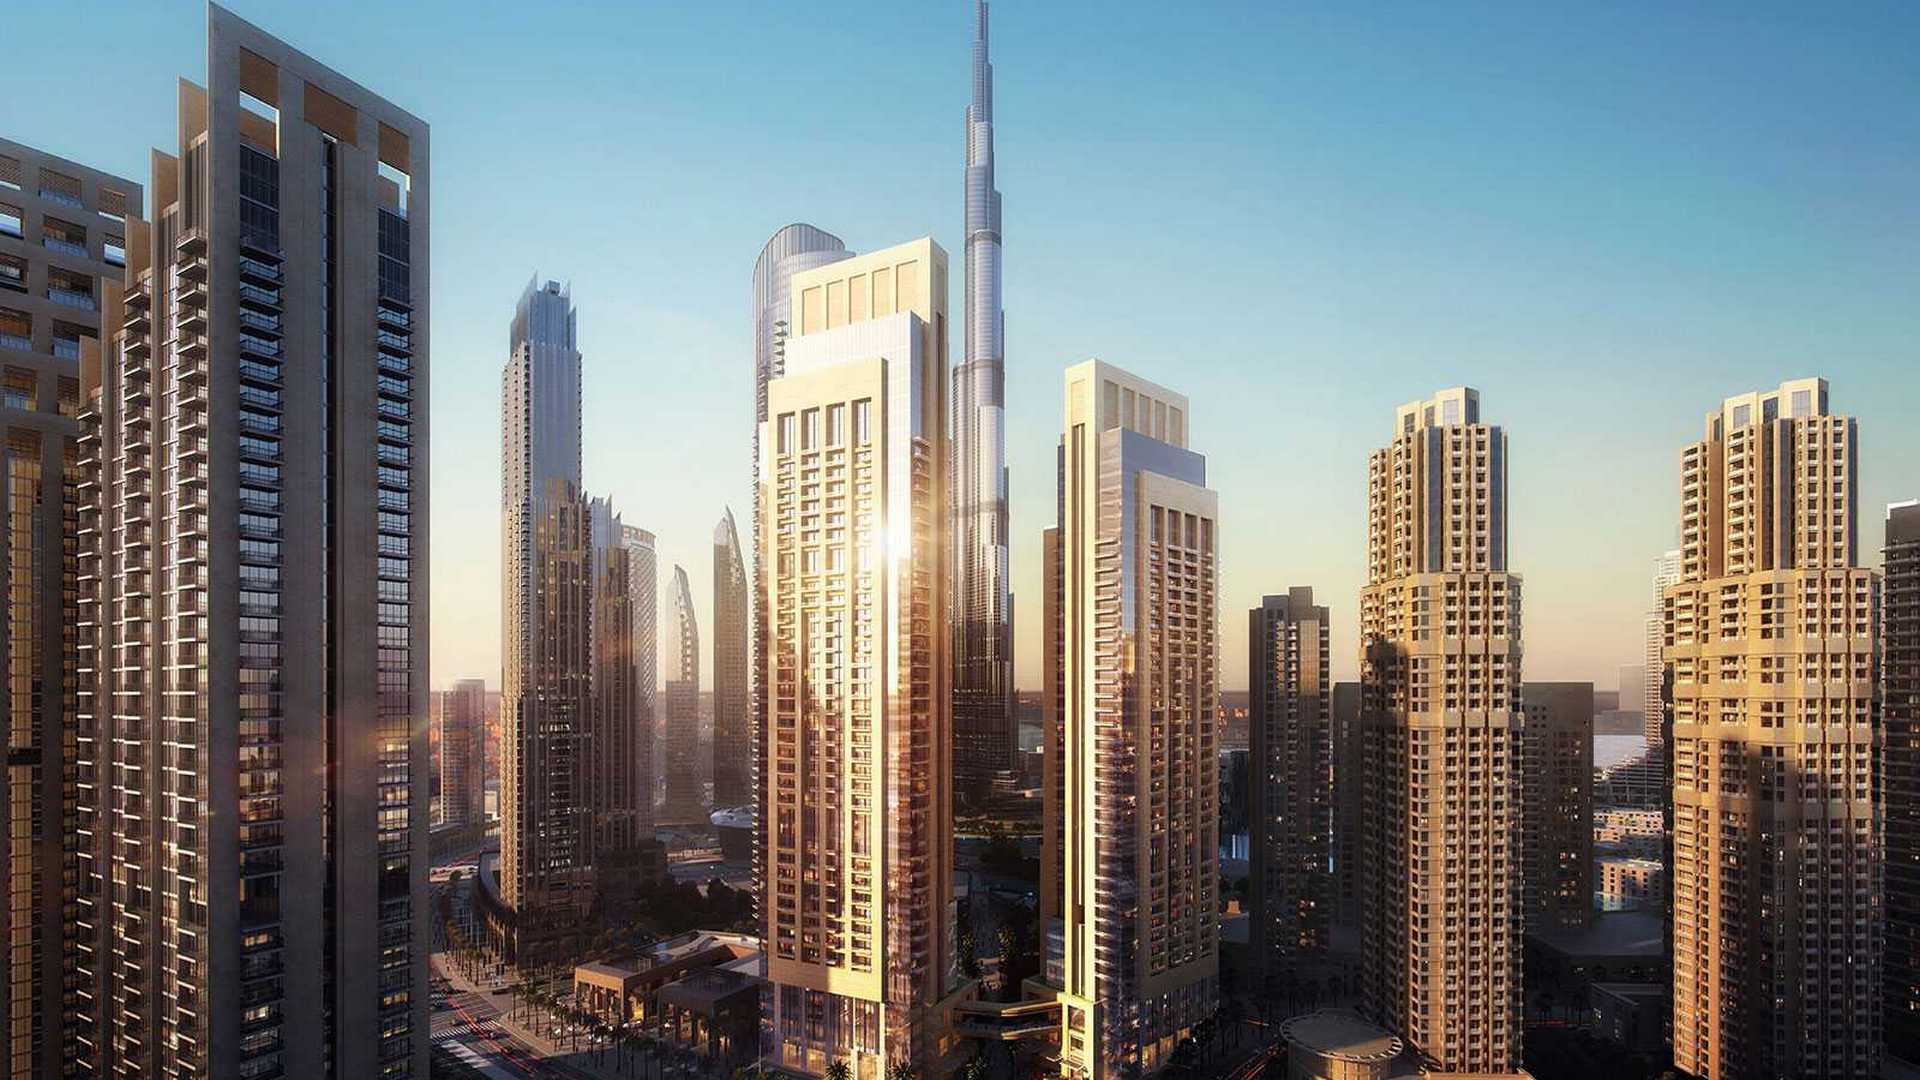 Act Towers - Limitless Valley - Real Estate - Dubai